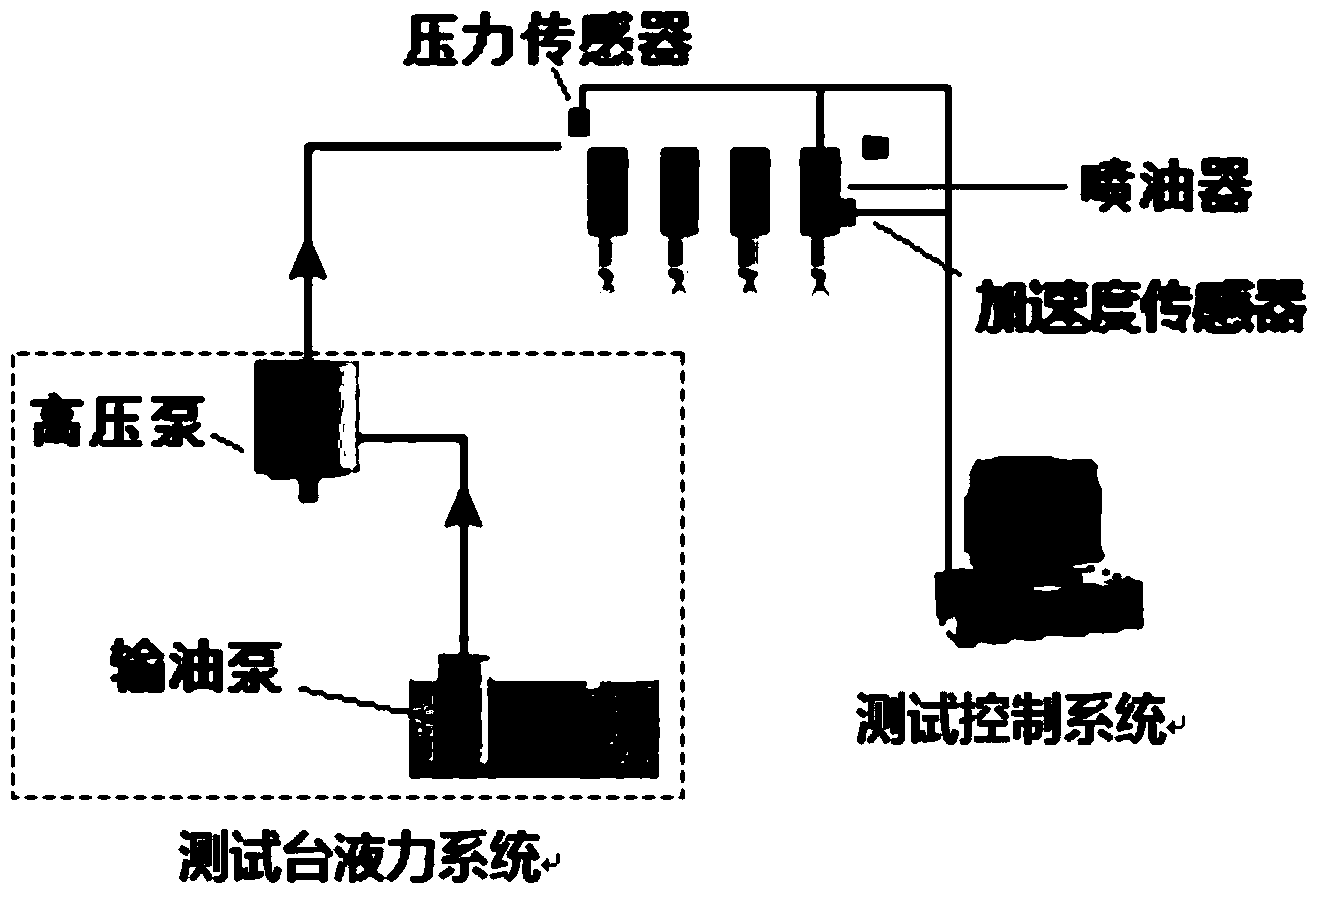 Count method for engine oil atomizer endurance test